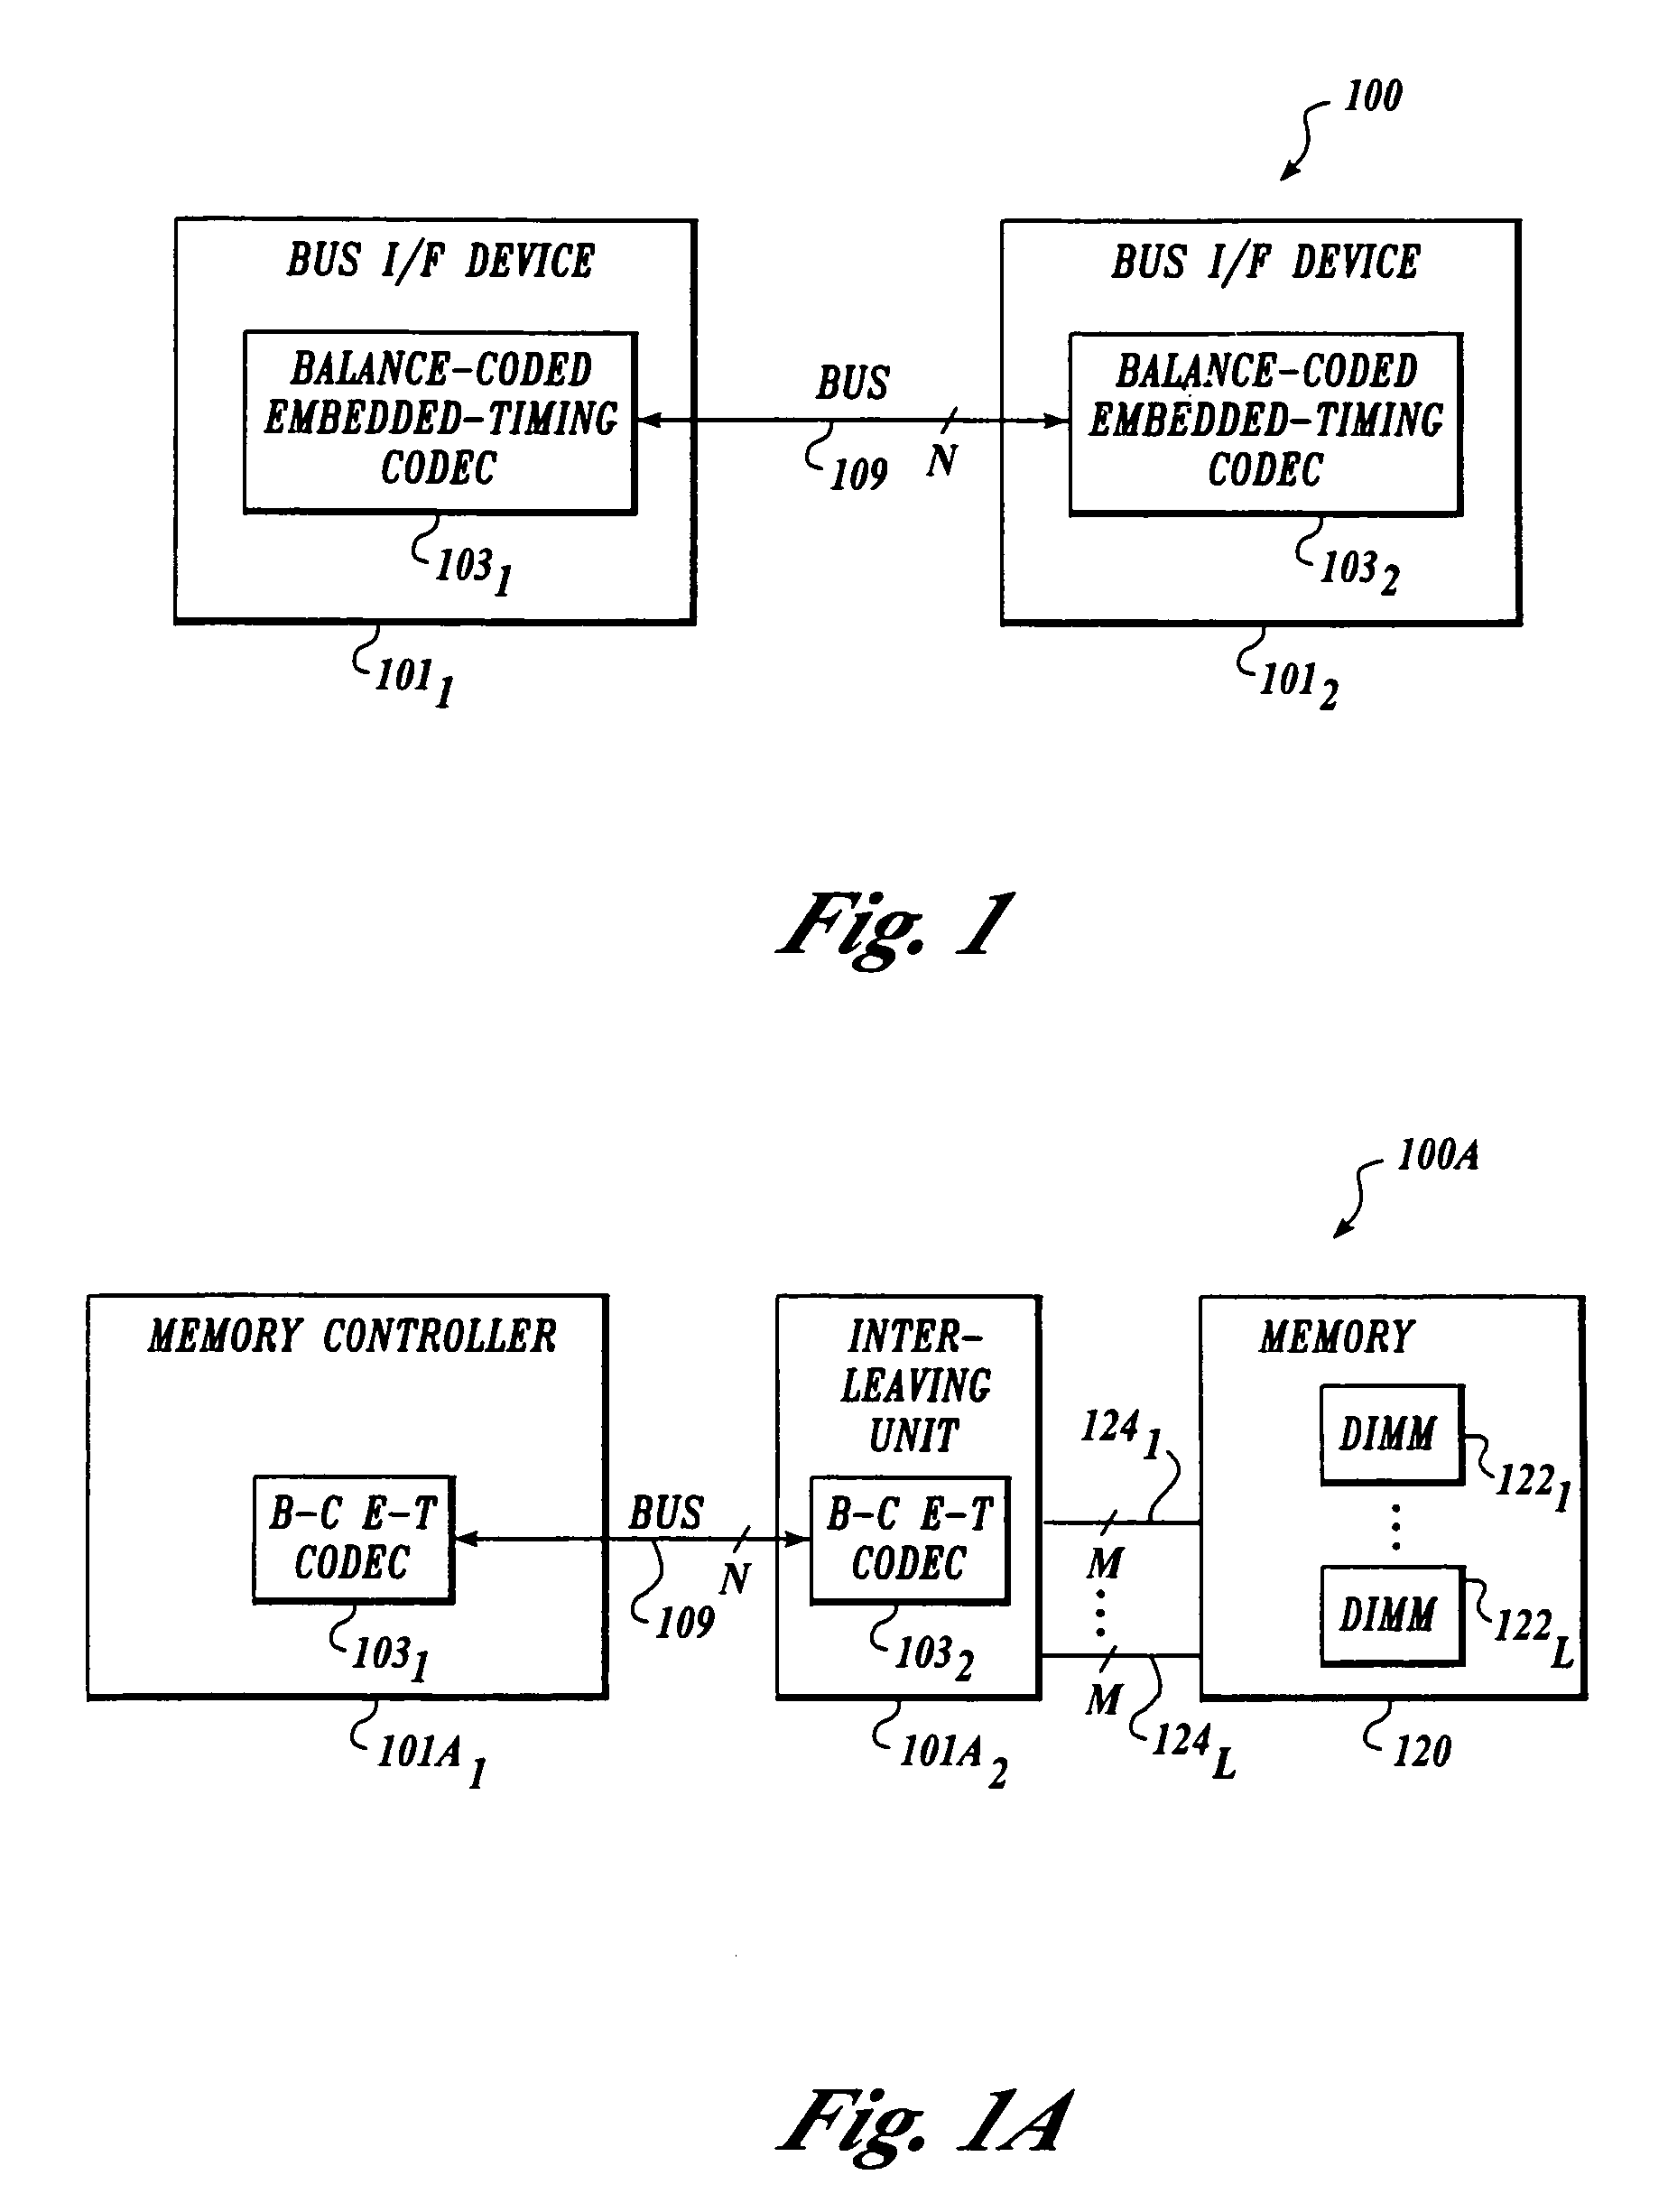 Single-ended balance-coded interface with embedded-timing